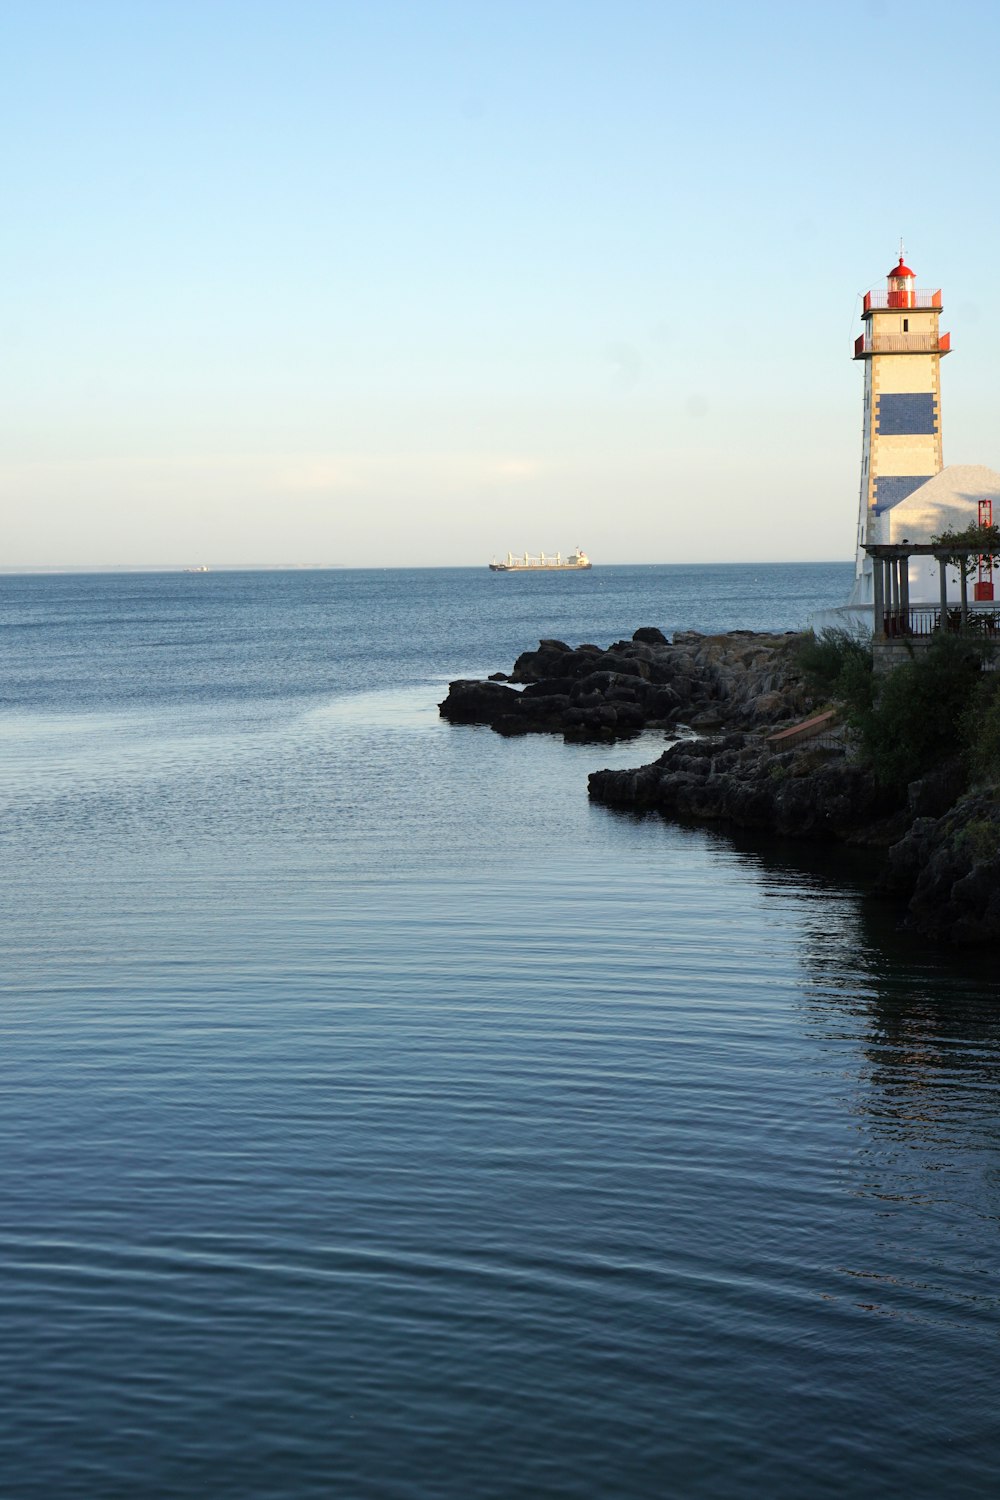 a light house sitting on the edge of a body of water